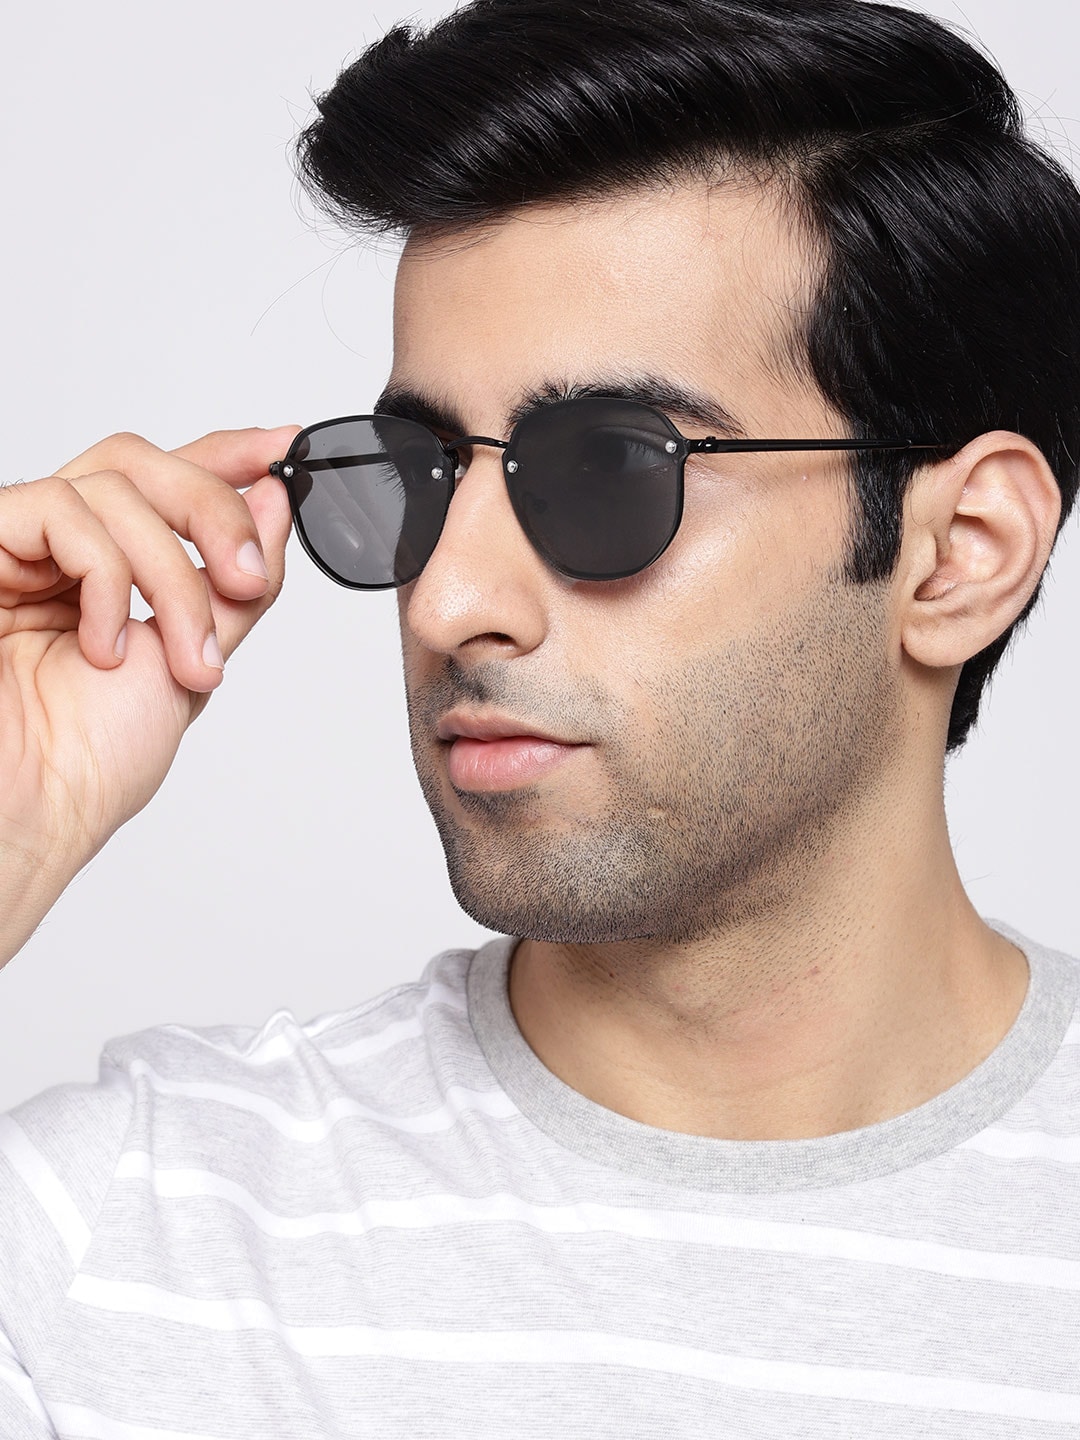 The Roadster Lifestyle Co Unisex Oval Sunglasses MFB-PN-PS-T9941 Price in India